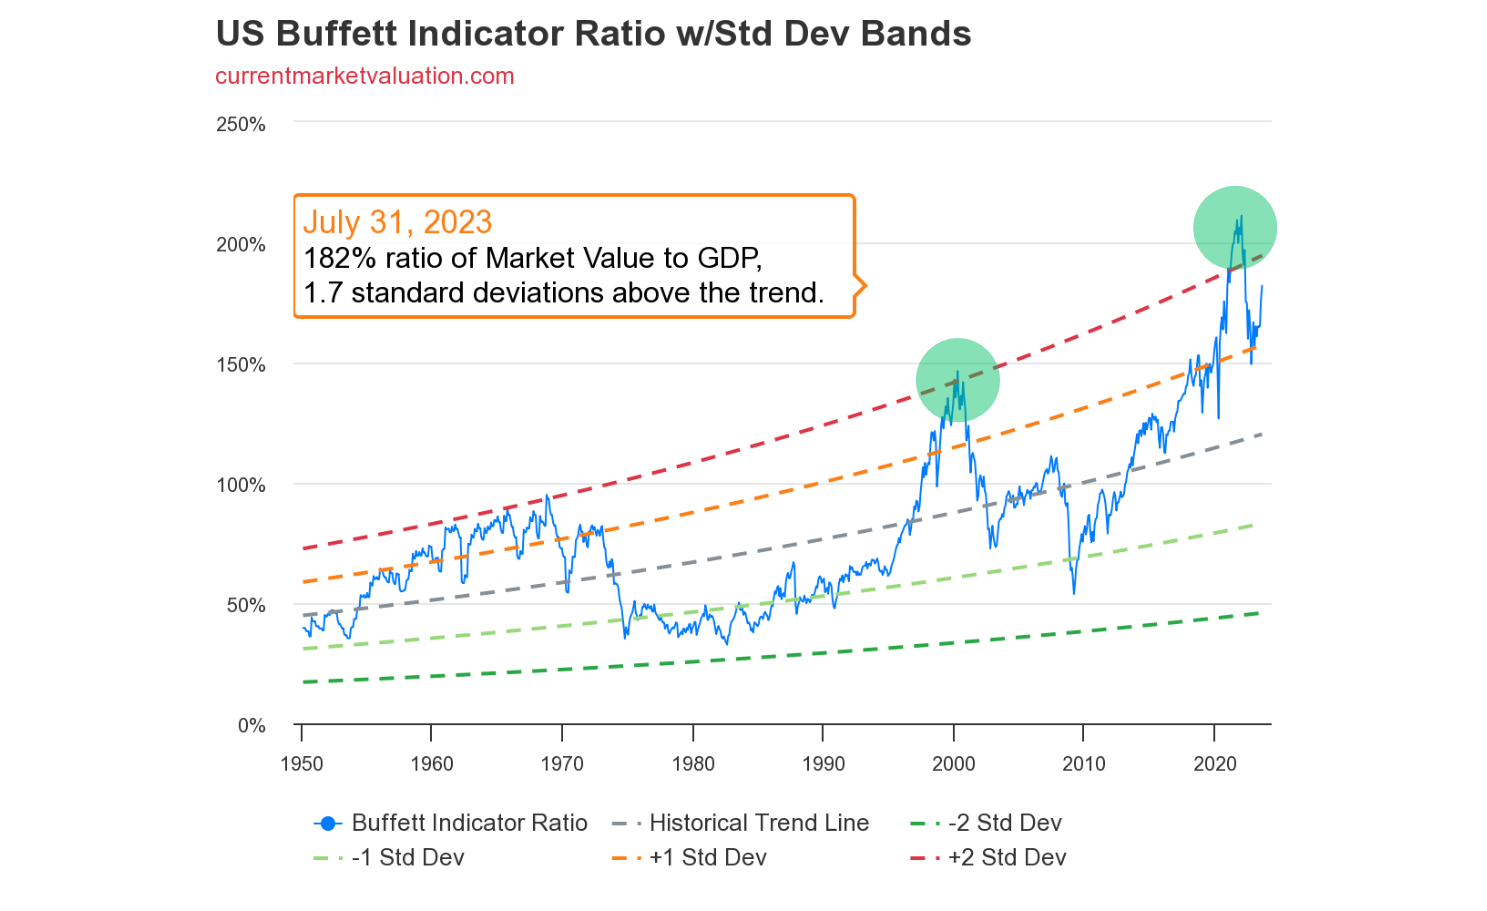 US Buffett Indicator Ratio with Std Dev Bands from 1950 to 2023